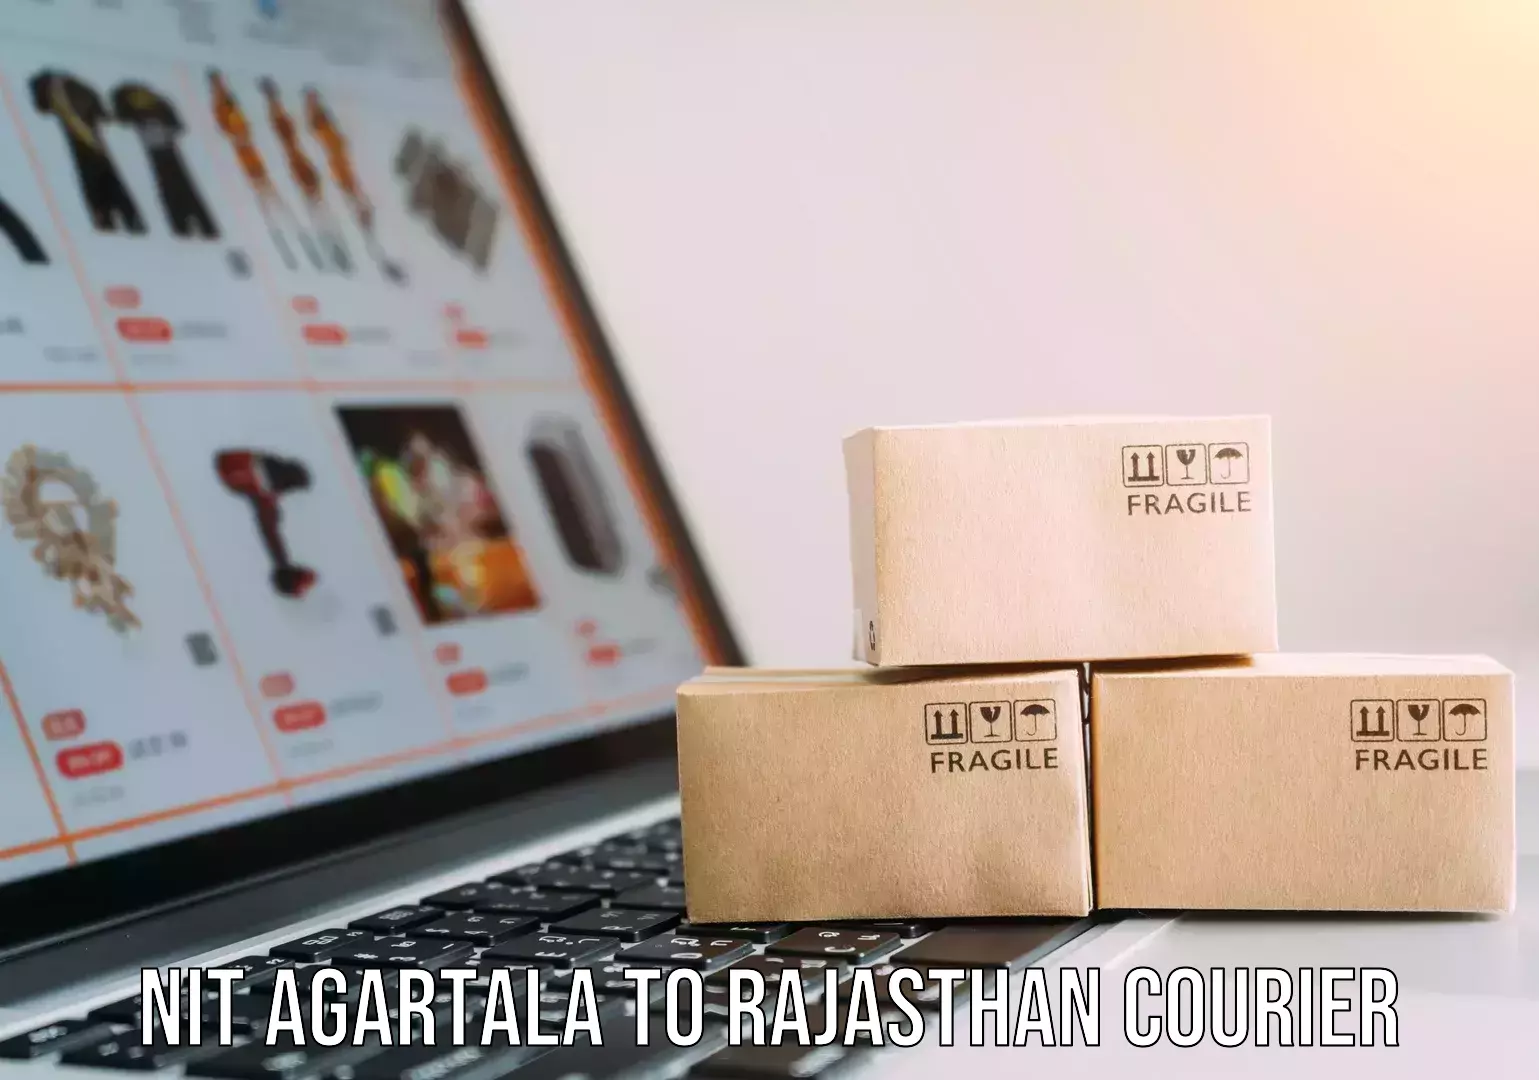 State-of-the-art courier technology NIT Agartala to Rajasthan